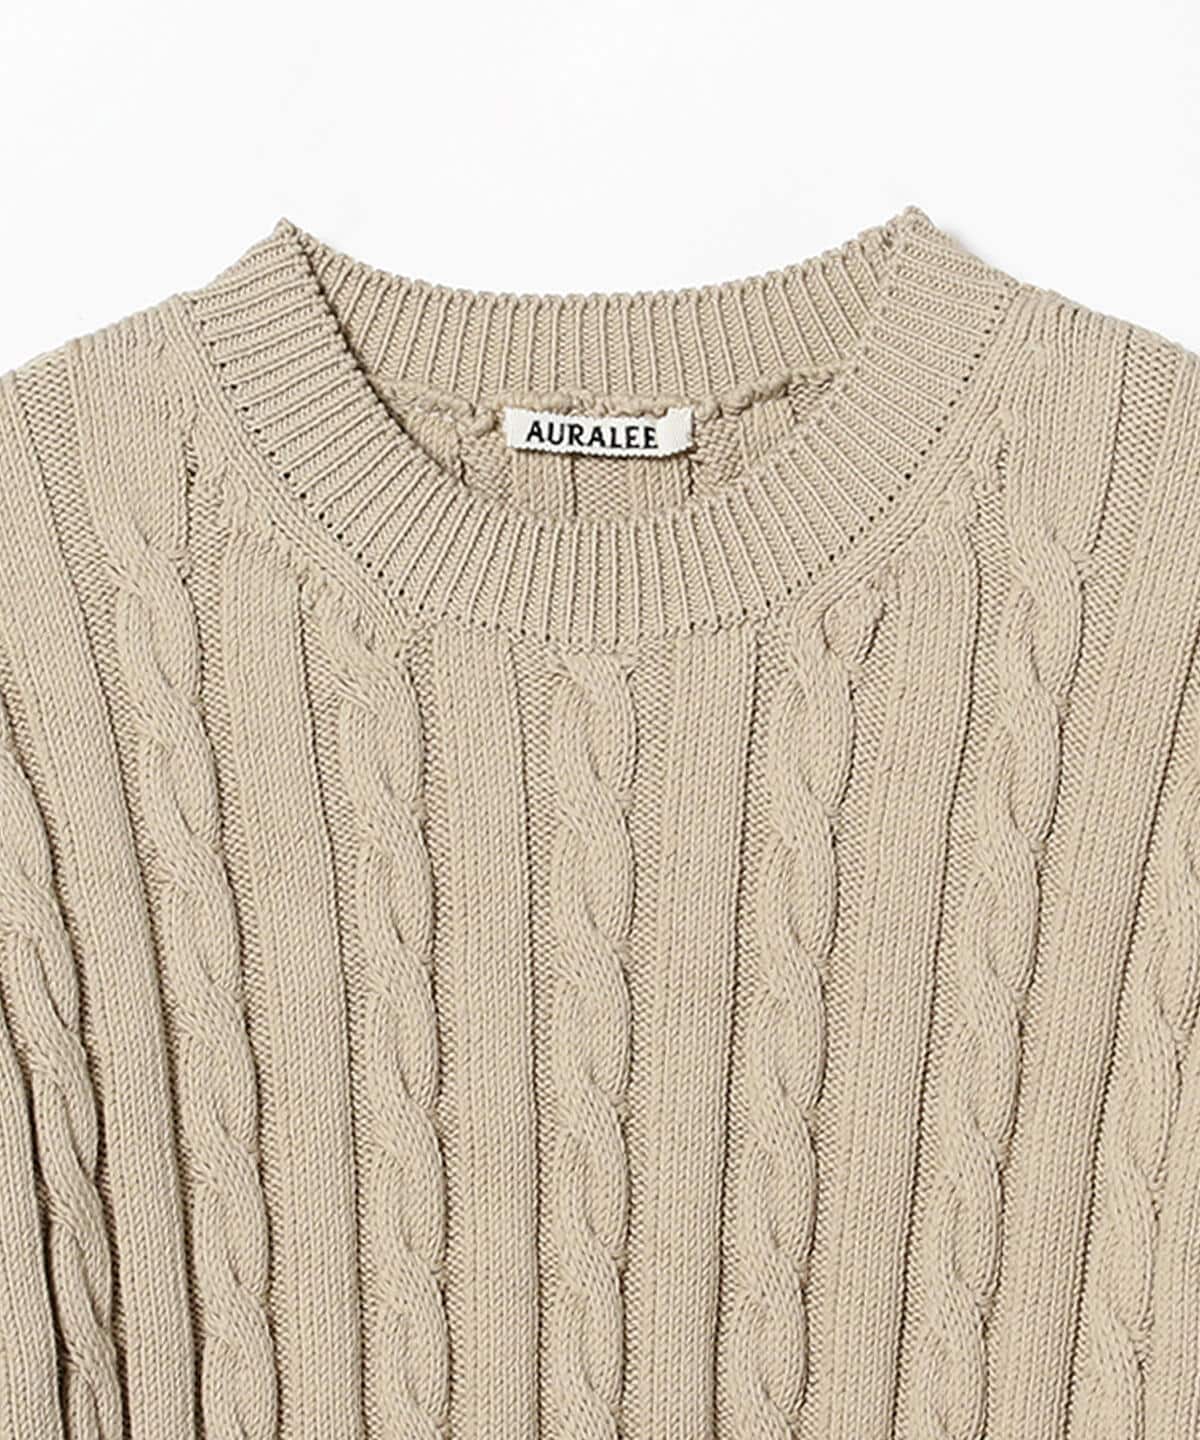 BEAMS（ビームス）AURALEE / COTTON CORD CABLE KNIT BIG PULLOVER 